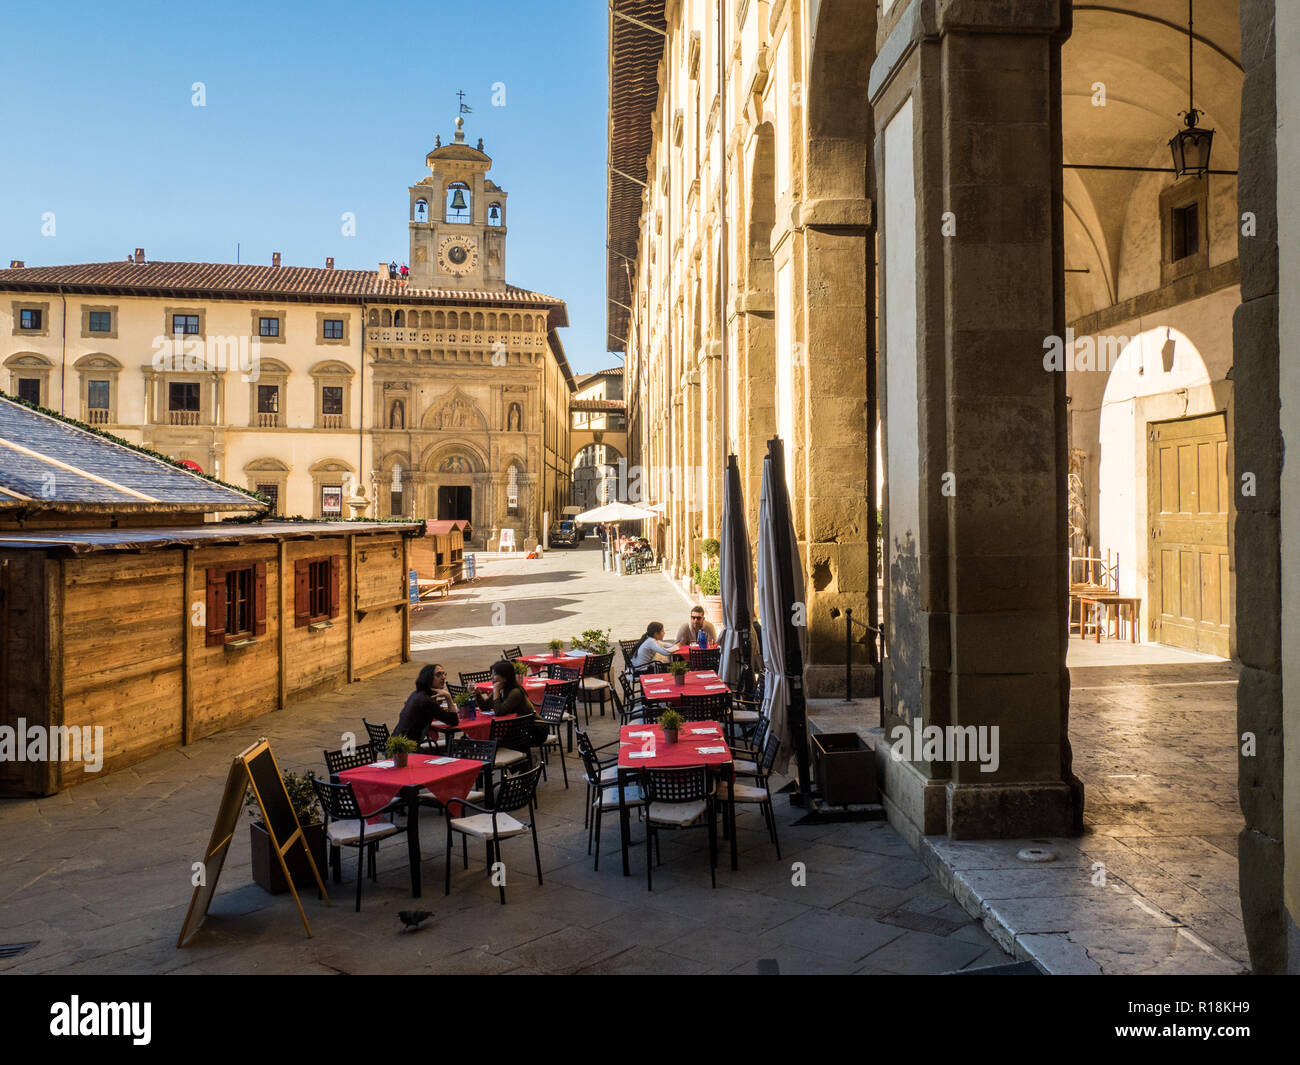 Piazza Grande in  the City of Arezzo, Tuscany, Italy, withThe bell tower of the gothic Palace of the Lay Fraternity & wooden Christmas market stalls. Stock Photo